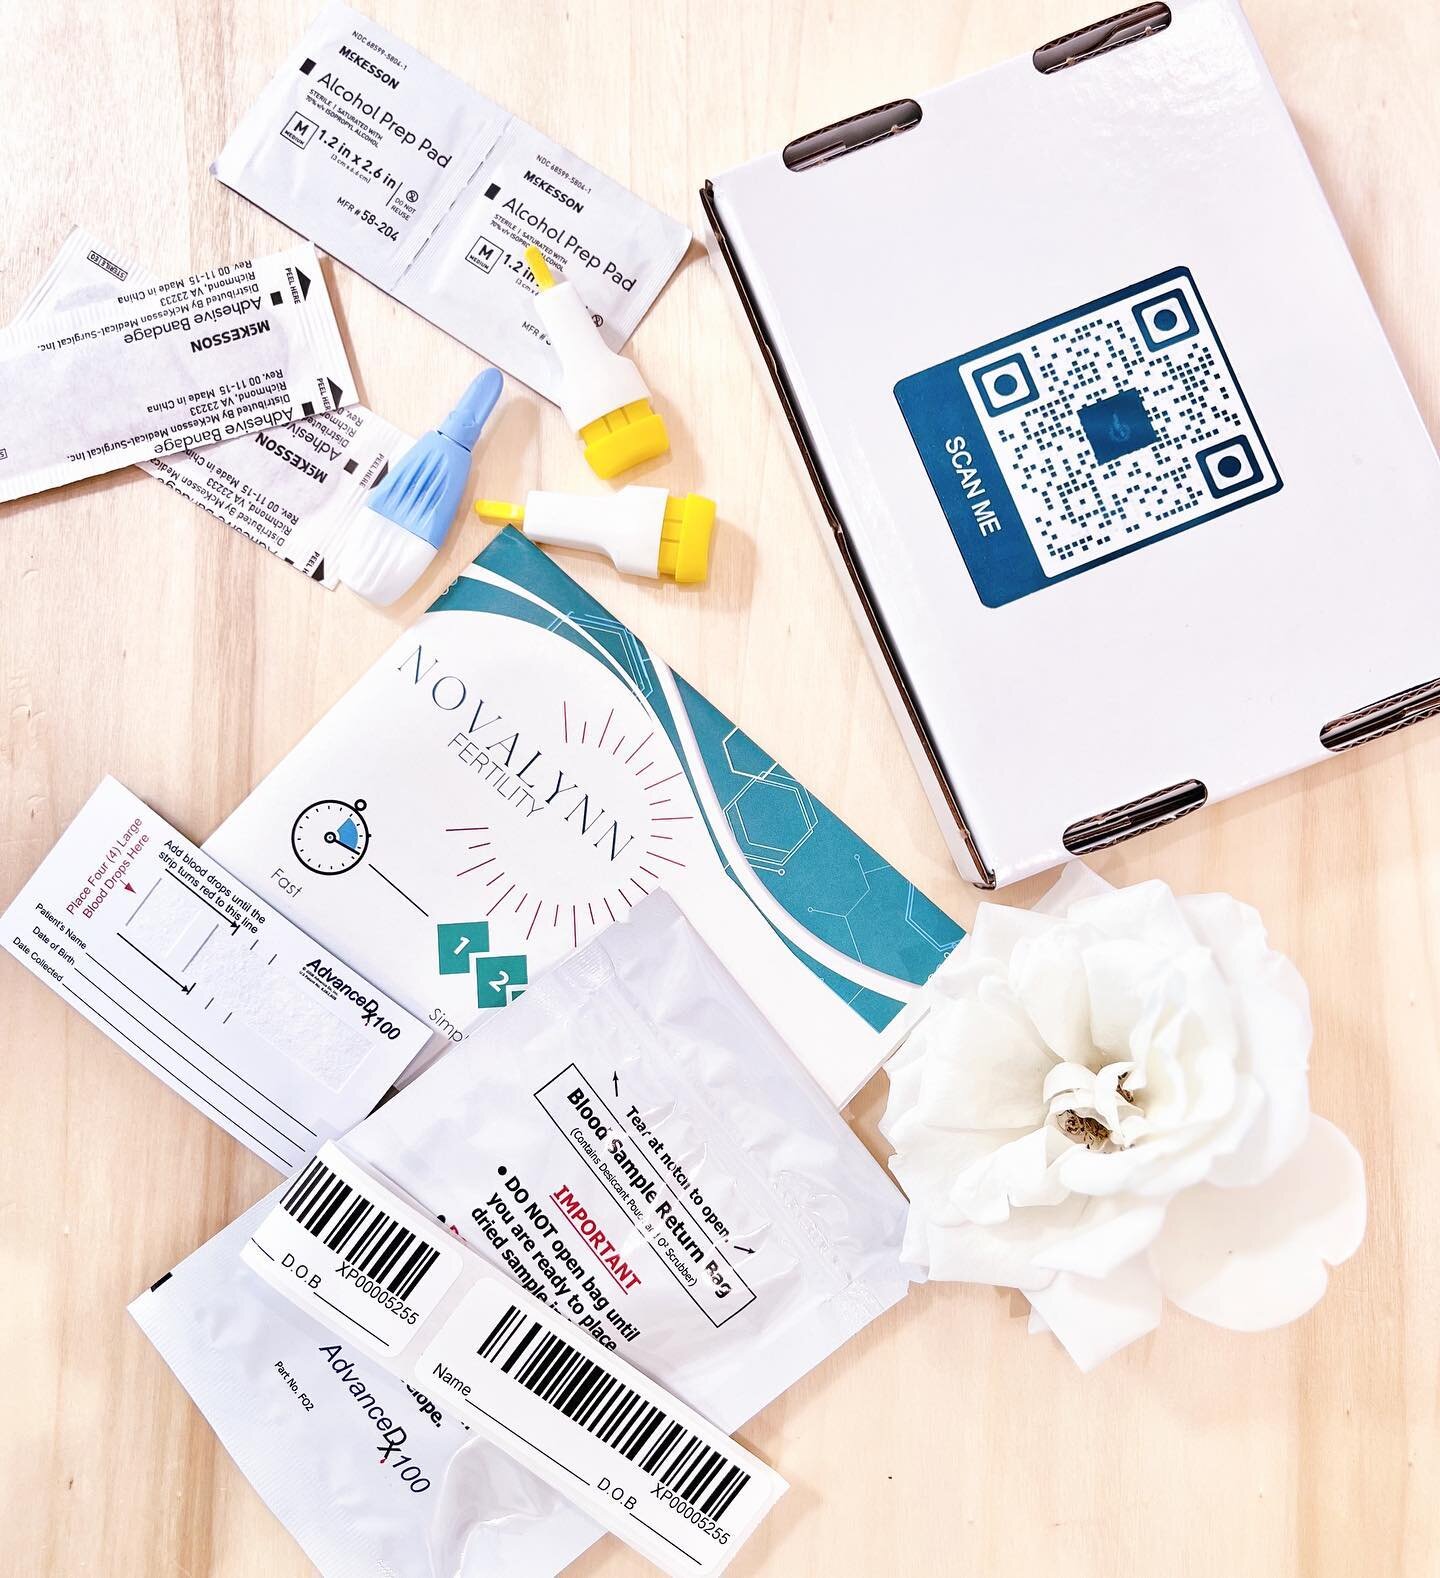 Some of the best benefits of our at-home test kits:

✨You don&rsquo;t need an appointment
✨You don&rsquo;t have to drive to and then wait in line at a place like Quest or Labcorp
✨YOU get your results in your own secure portal as soon as your test is